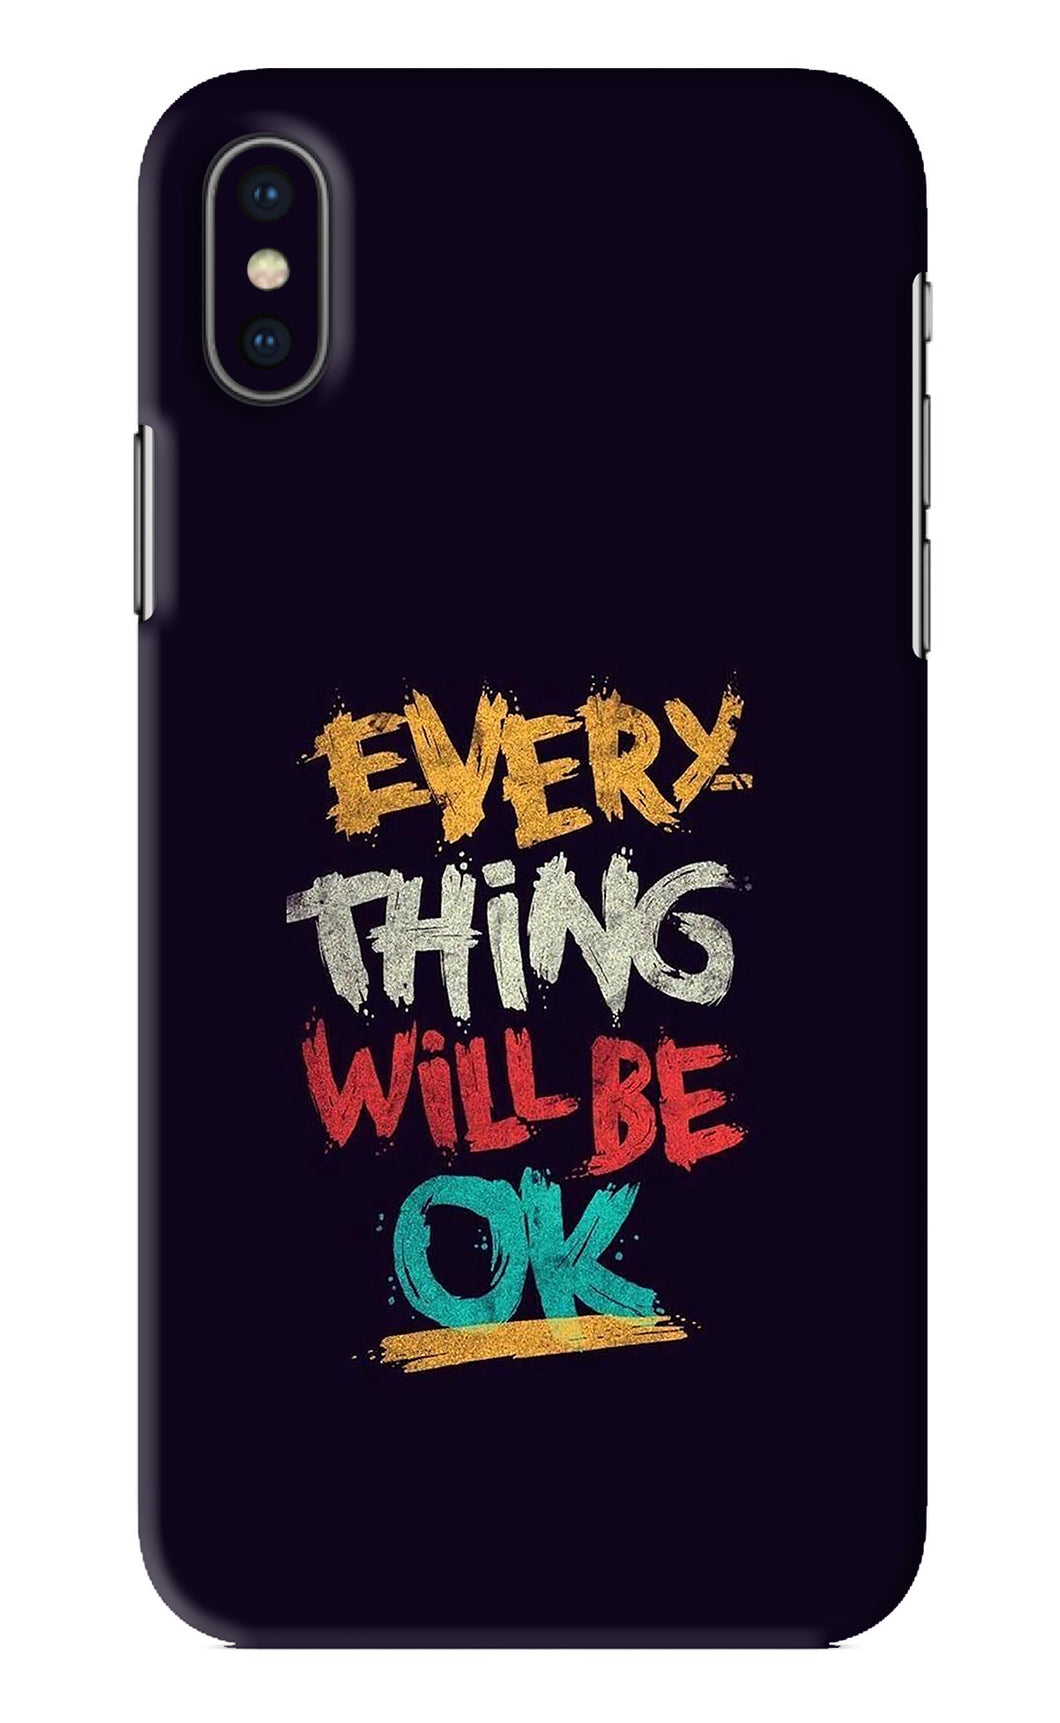 Everything Will Be Ok iPhone X Back Skin Wrap